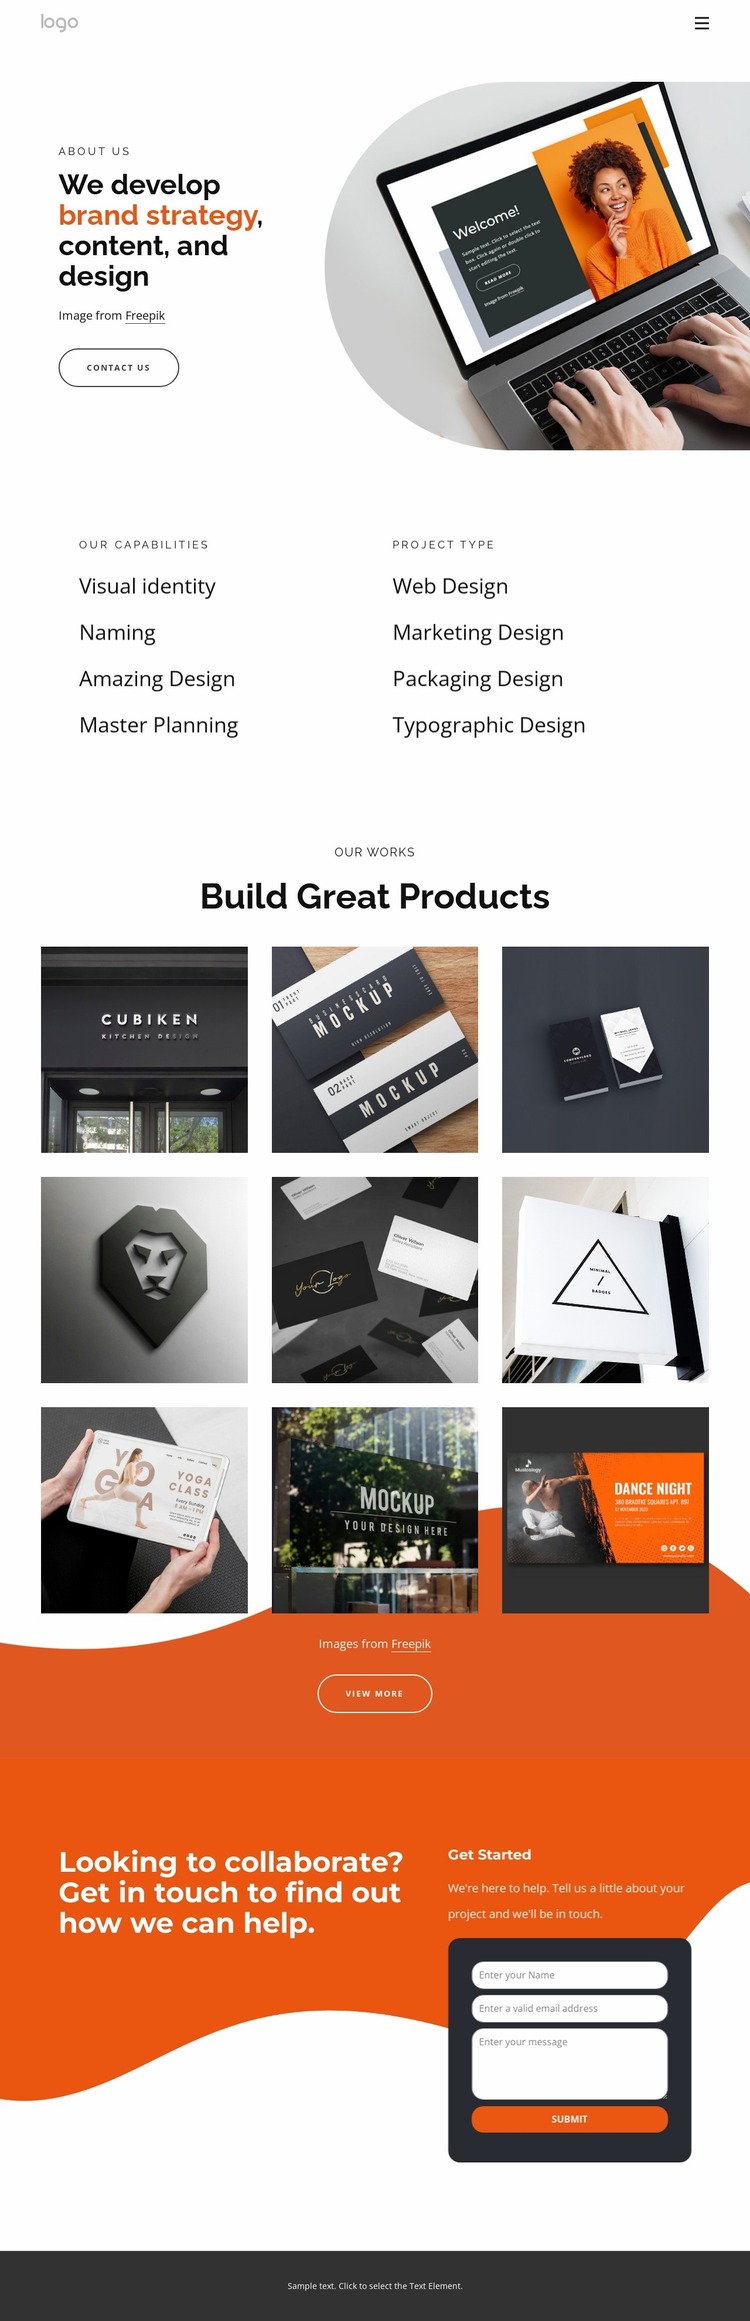 We create thoughtful experiences for humans Website Mockup